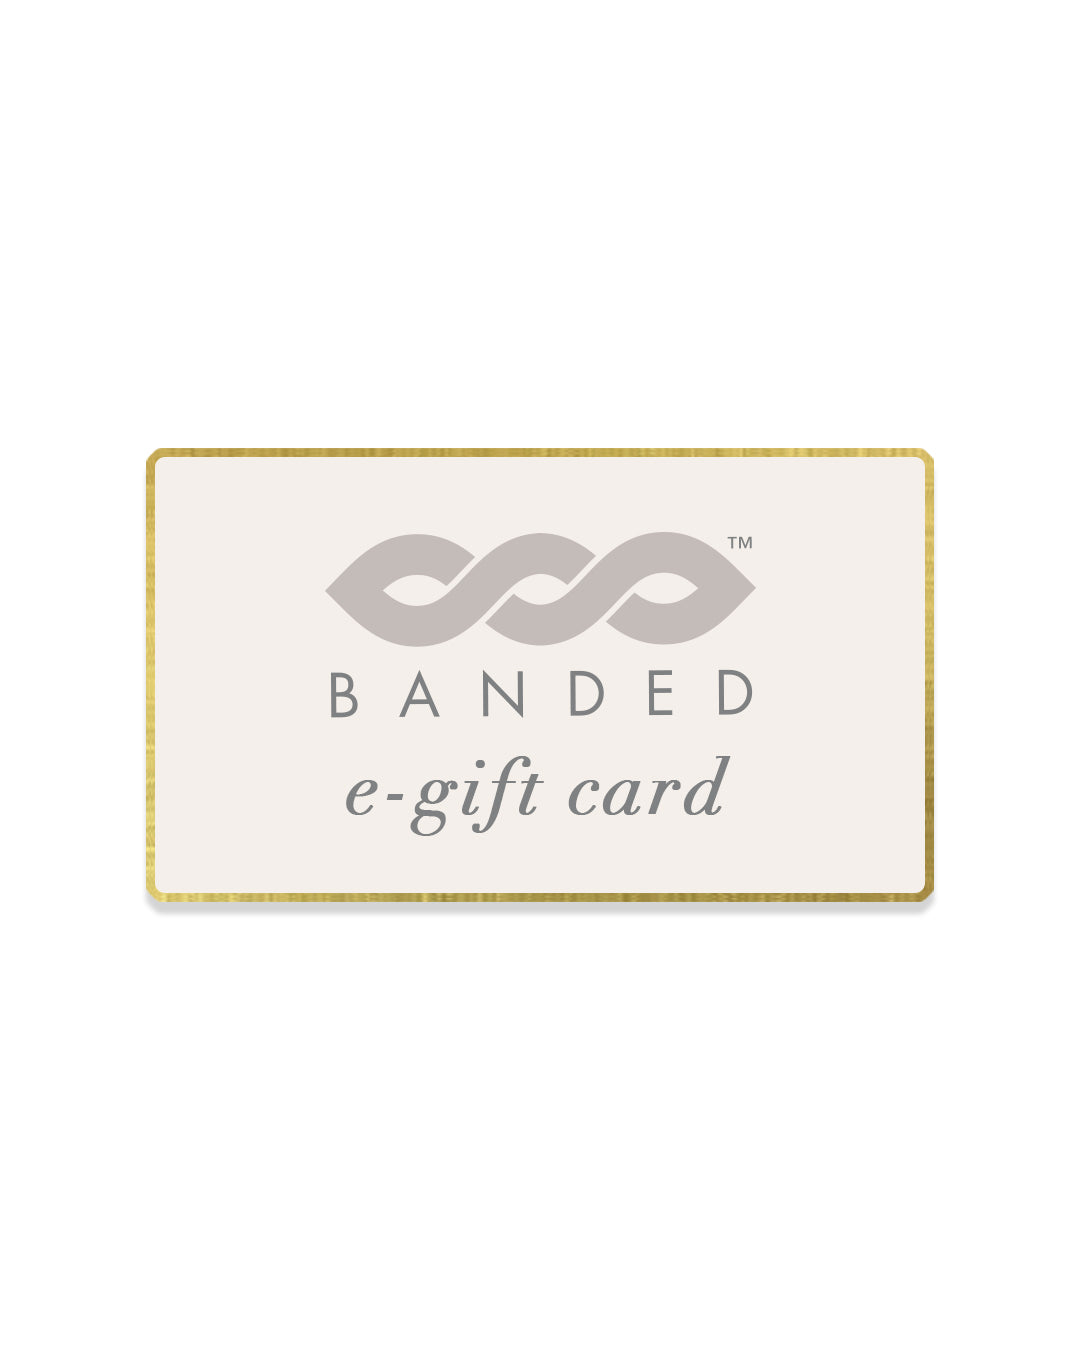 BANDED Gift Card